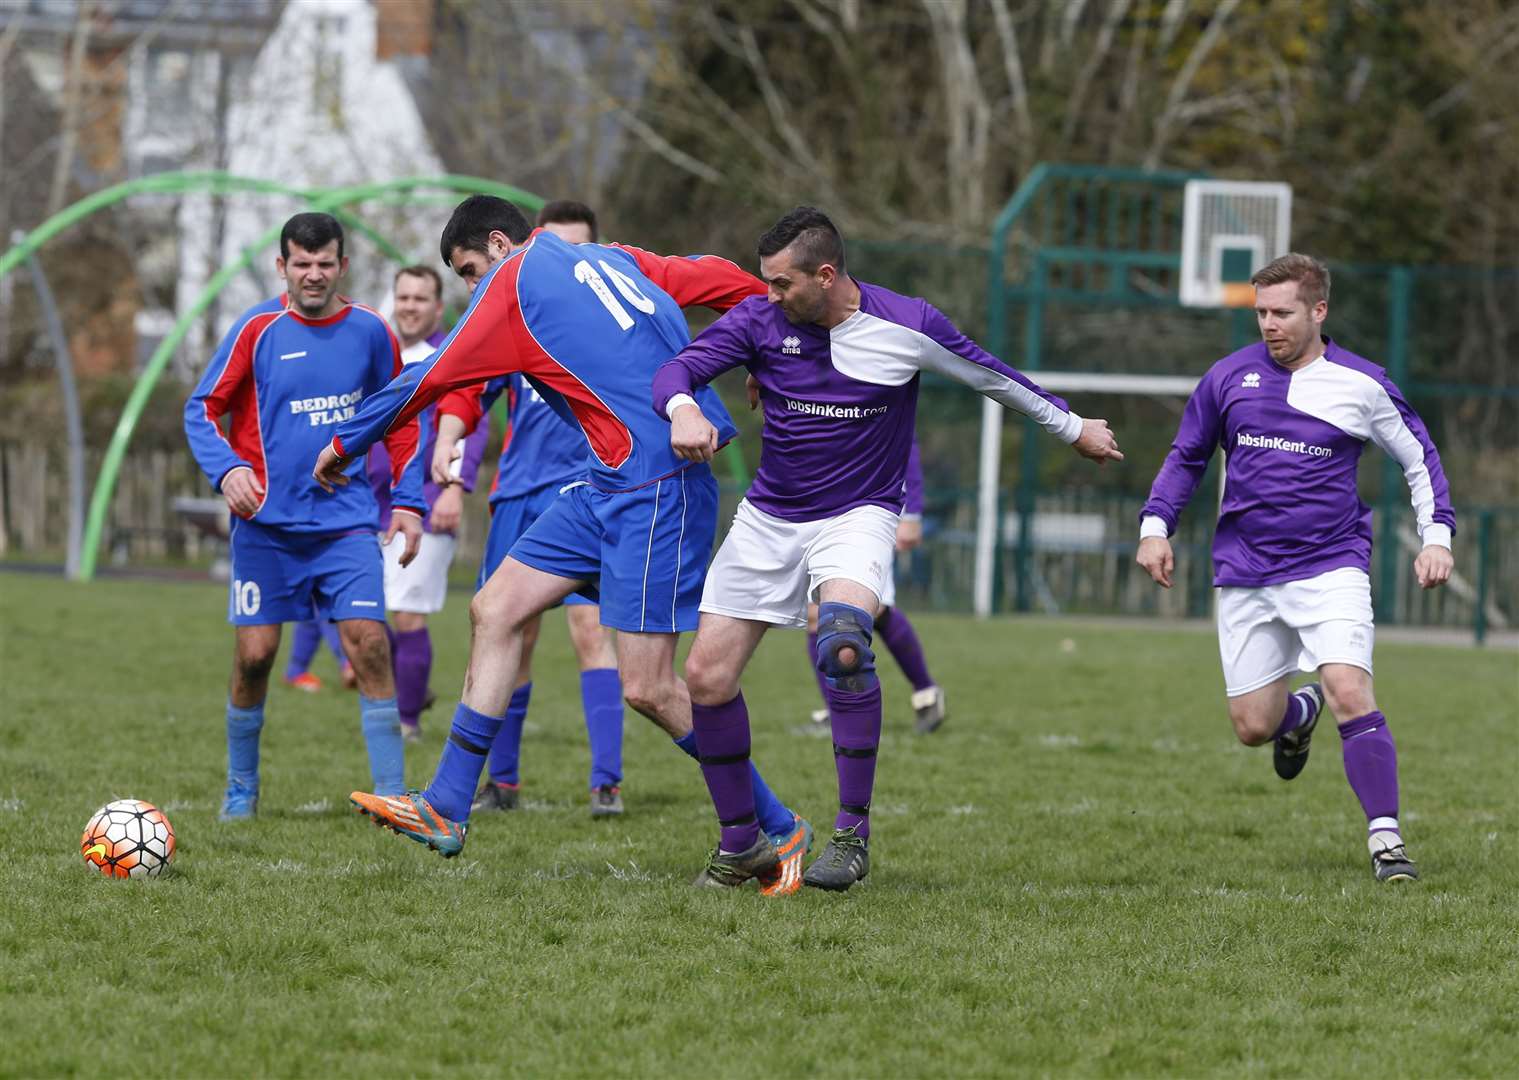 Wayne Duck (in purple) was a keen footballer with Park Royal